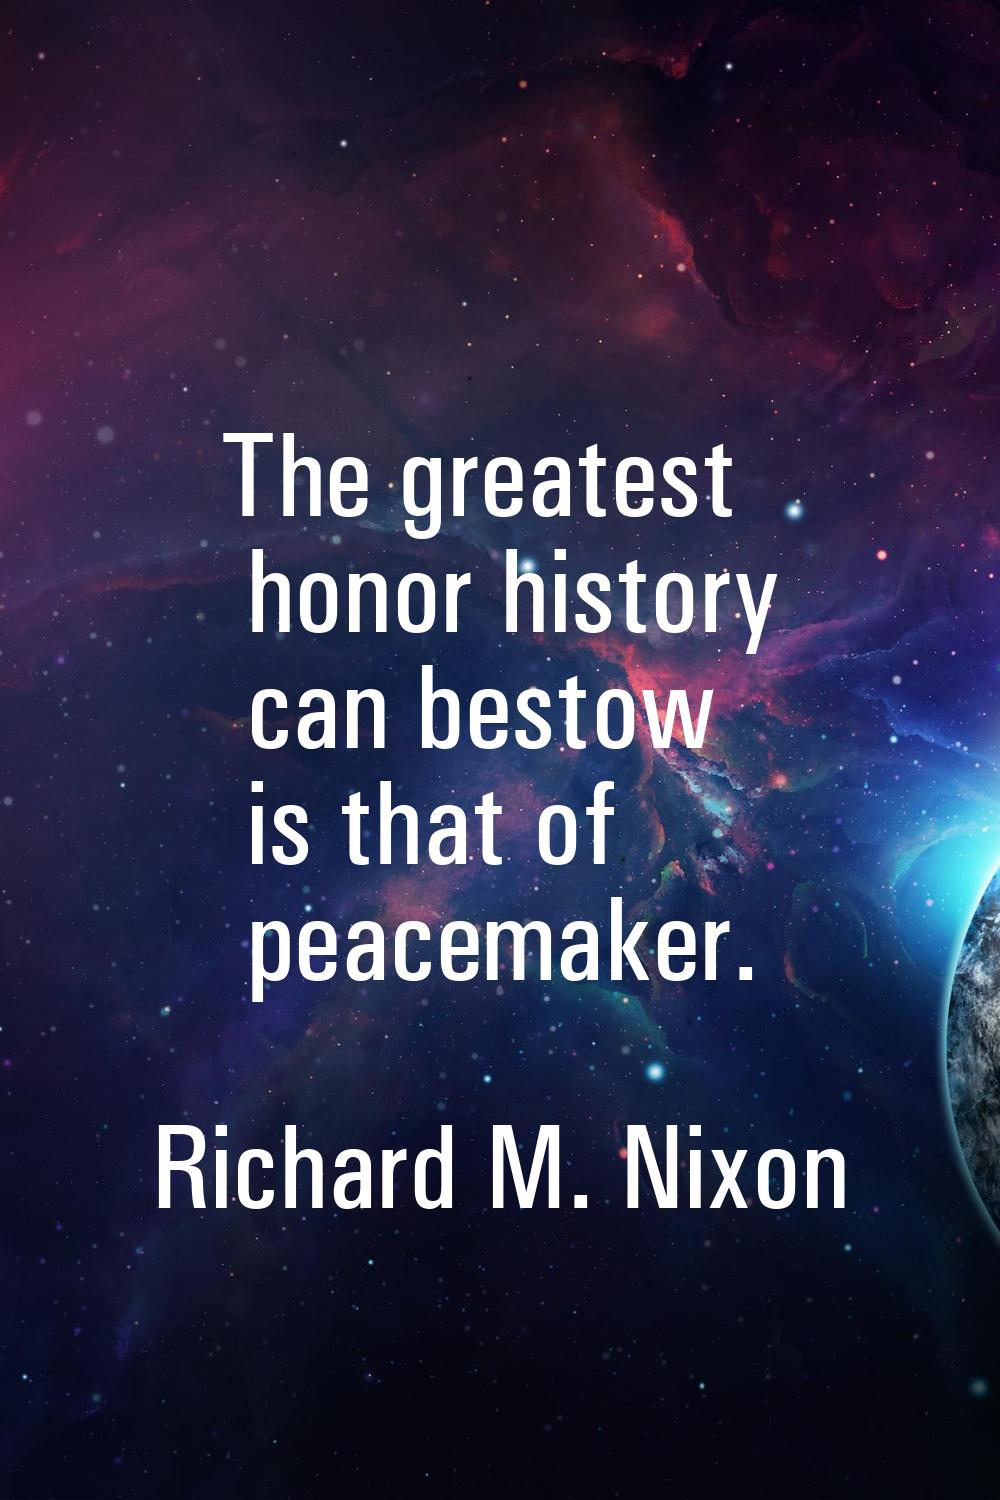 The greatest honor history can bestow is that of peacemaker.